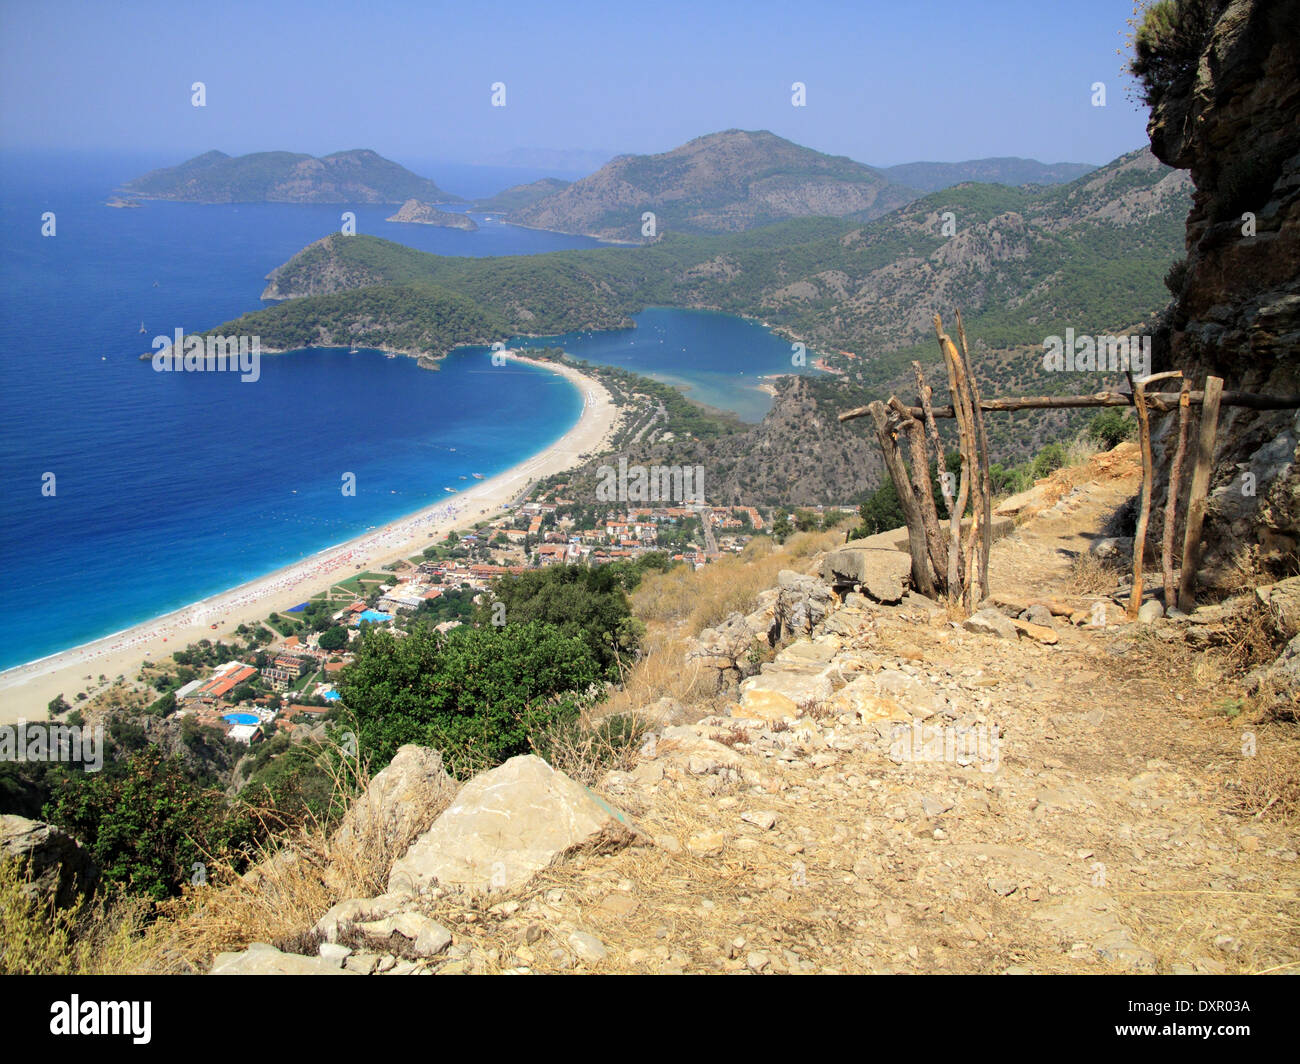 A view of Oludeniz and the Blue Lagoon seen from the Lycian way in Mugla province of South Western Turkey Stock Photo